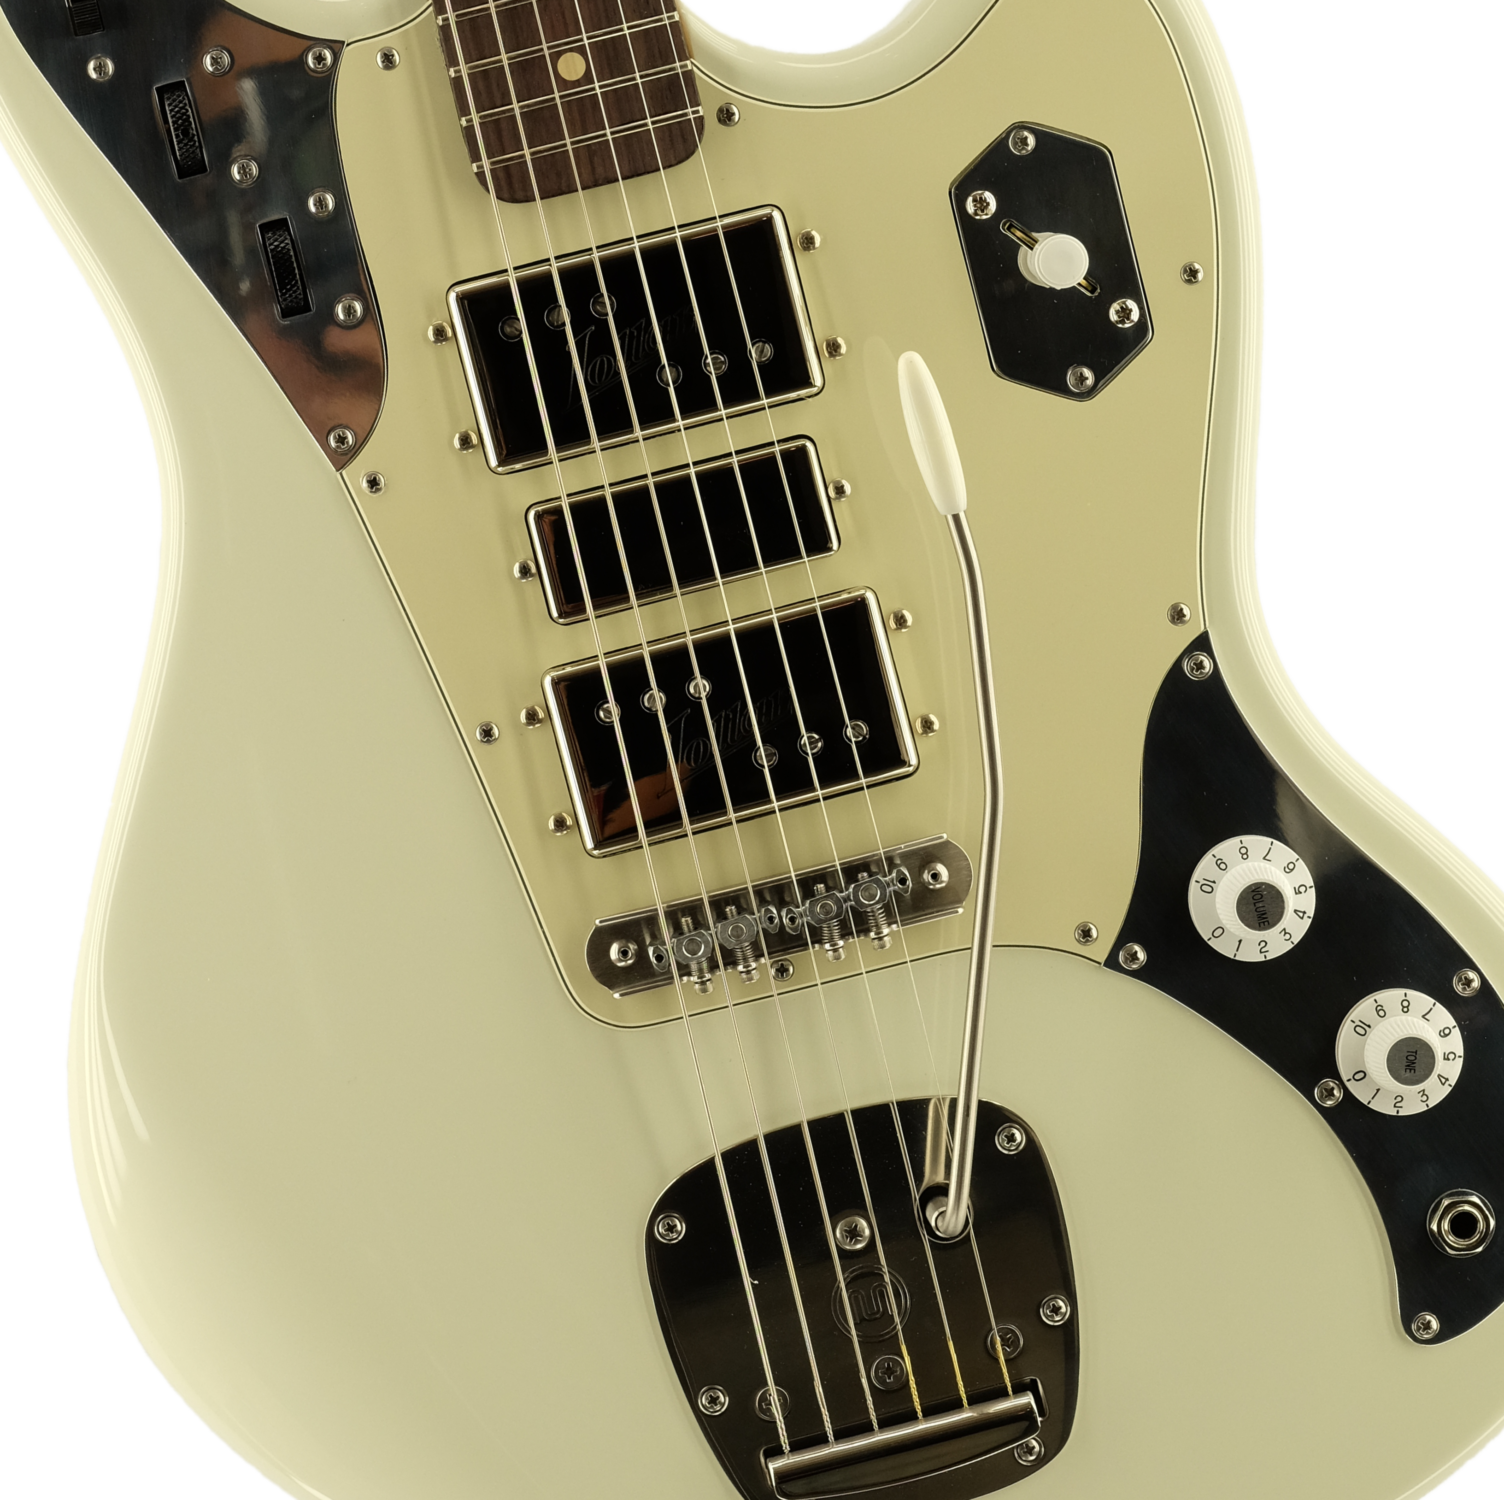 Olympic White Relevator LS - Body Detail